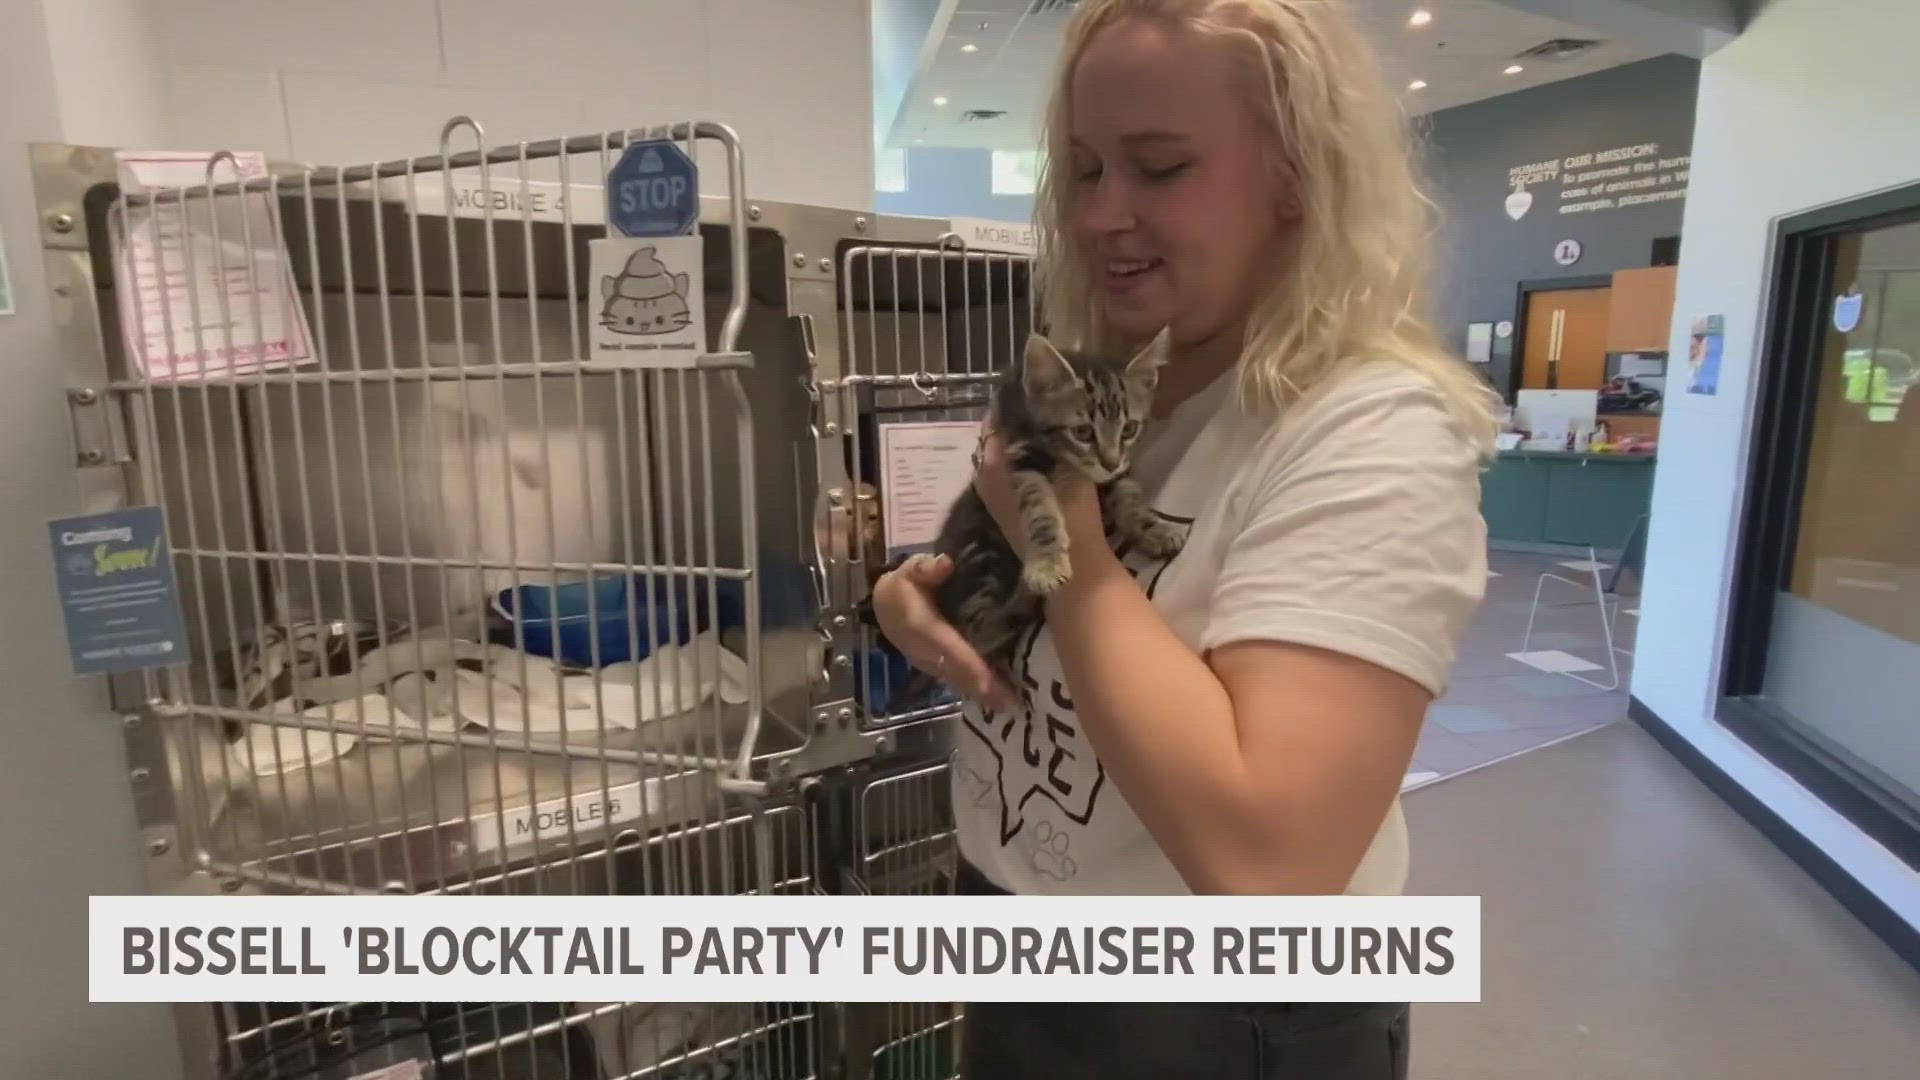 The Bissell 'Blocktail Party' is returning next month to once again fundraiser for furry friends in need of a home.